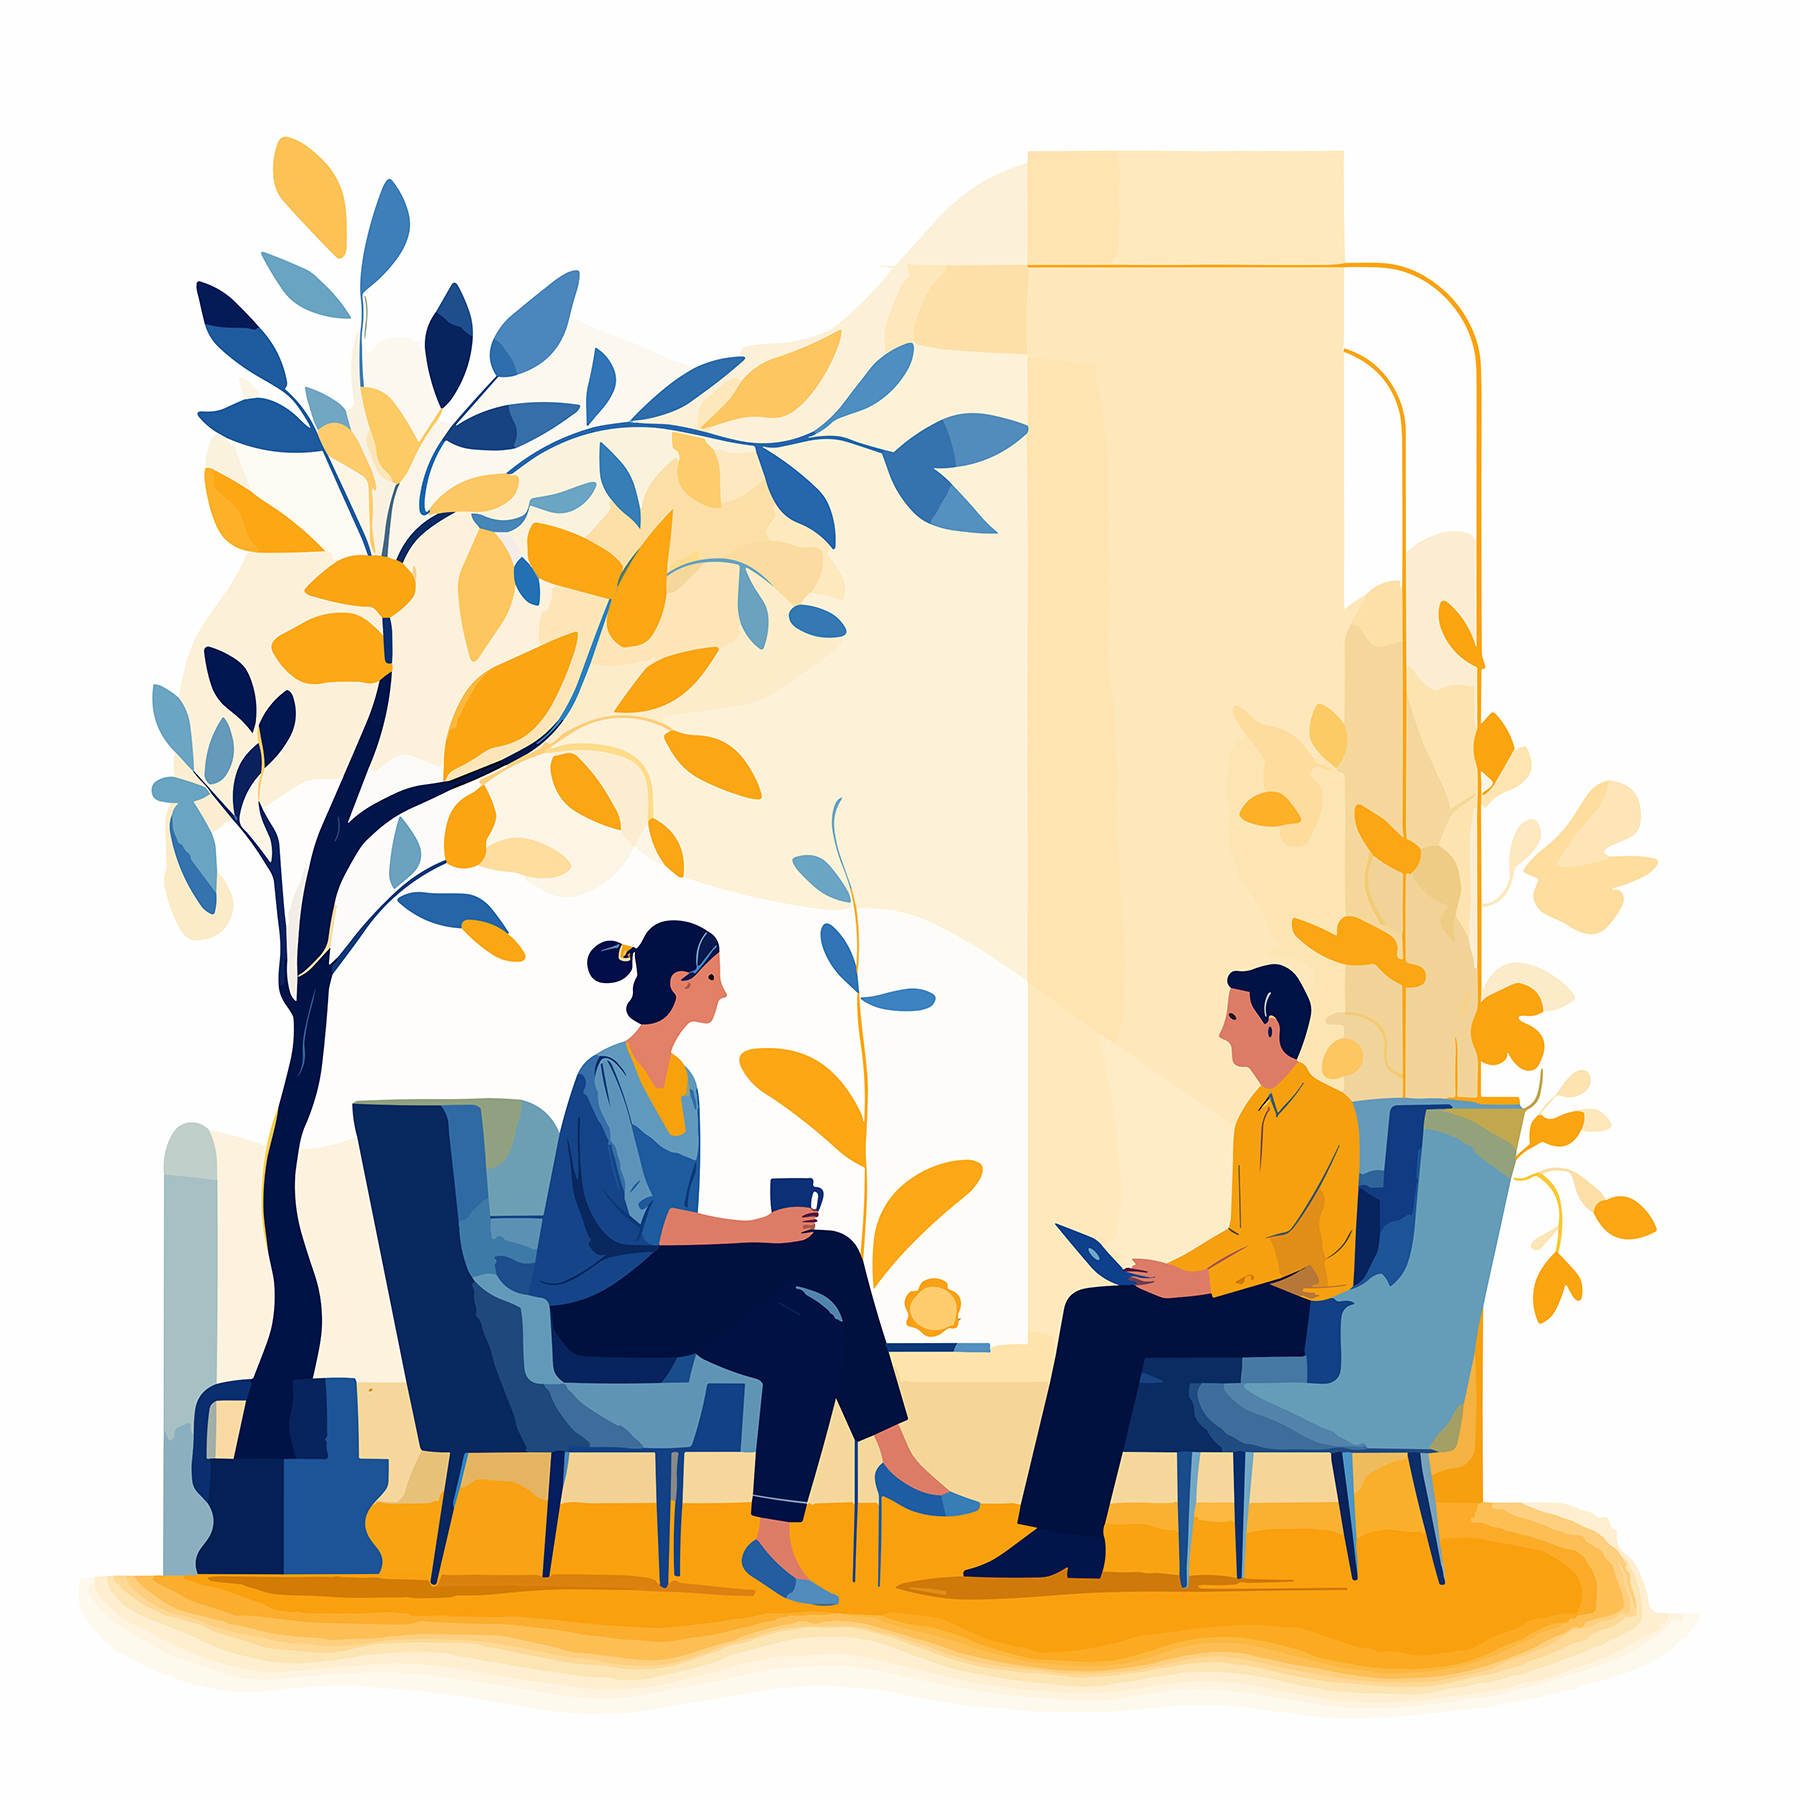 Illustration of a conversation with a psychologist two people in